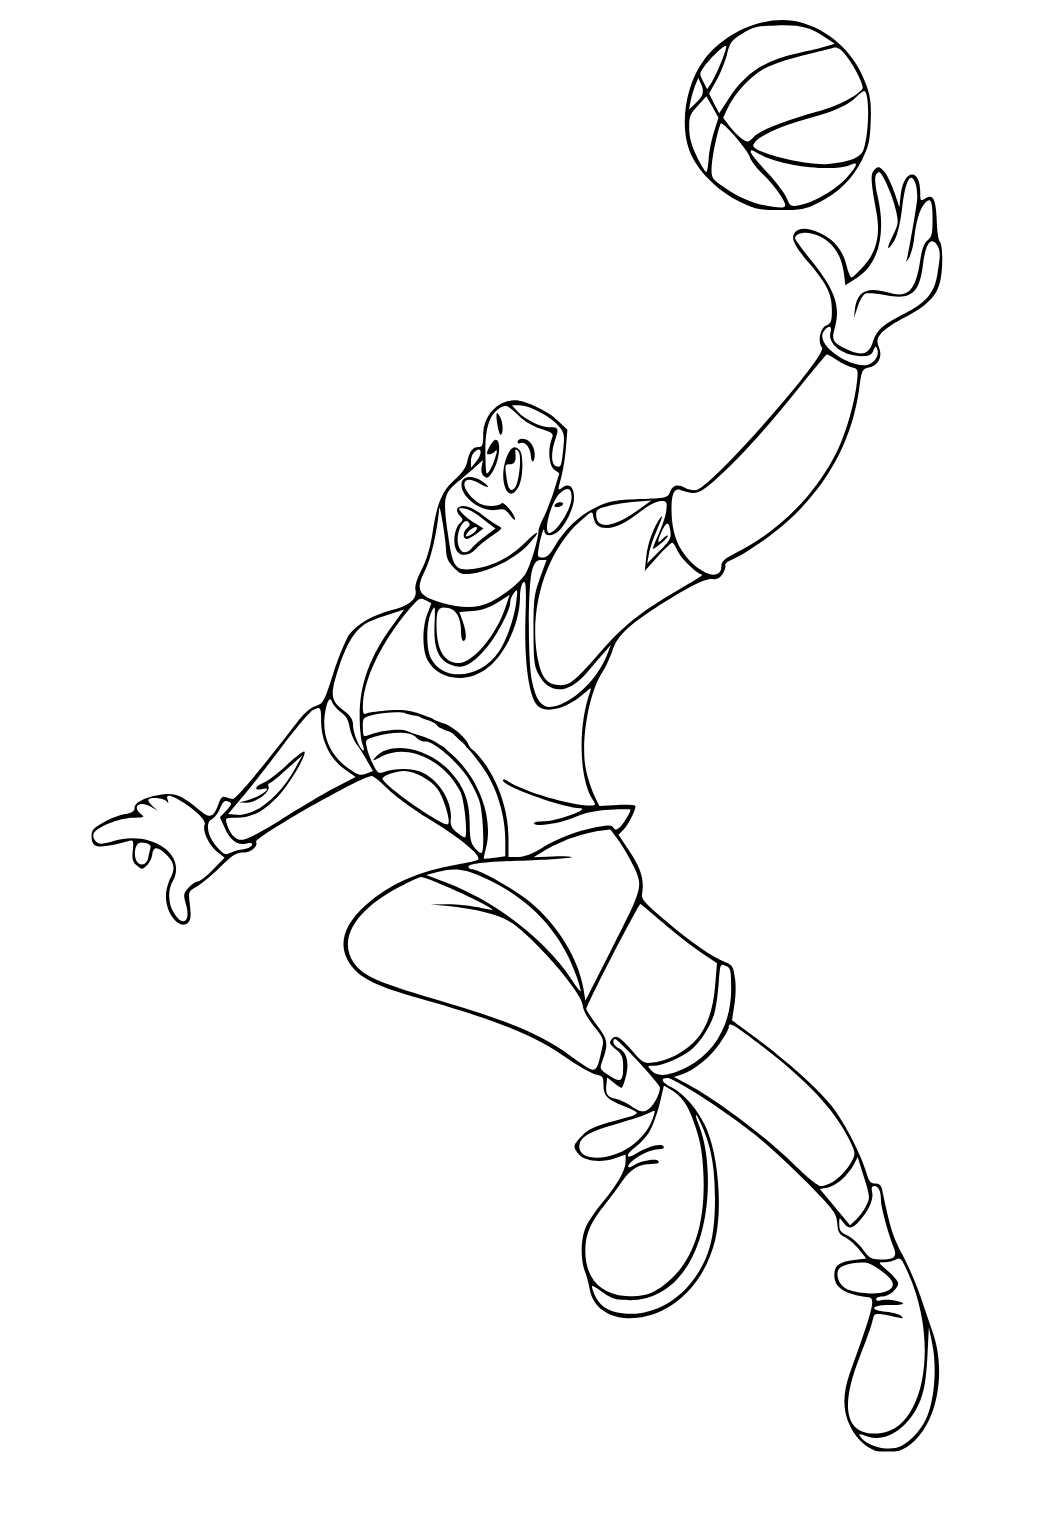 Free Printable LeBron James Jump Coloring Page for Adults and Kids ...